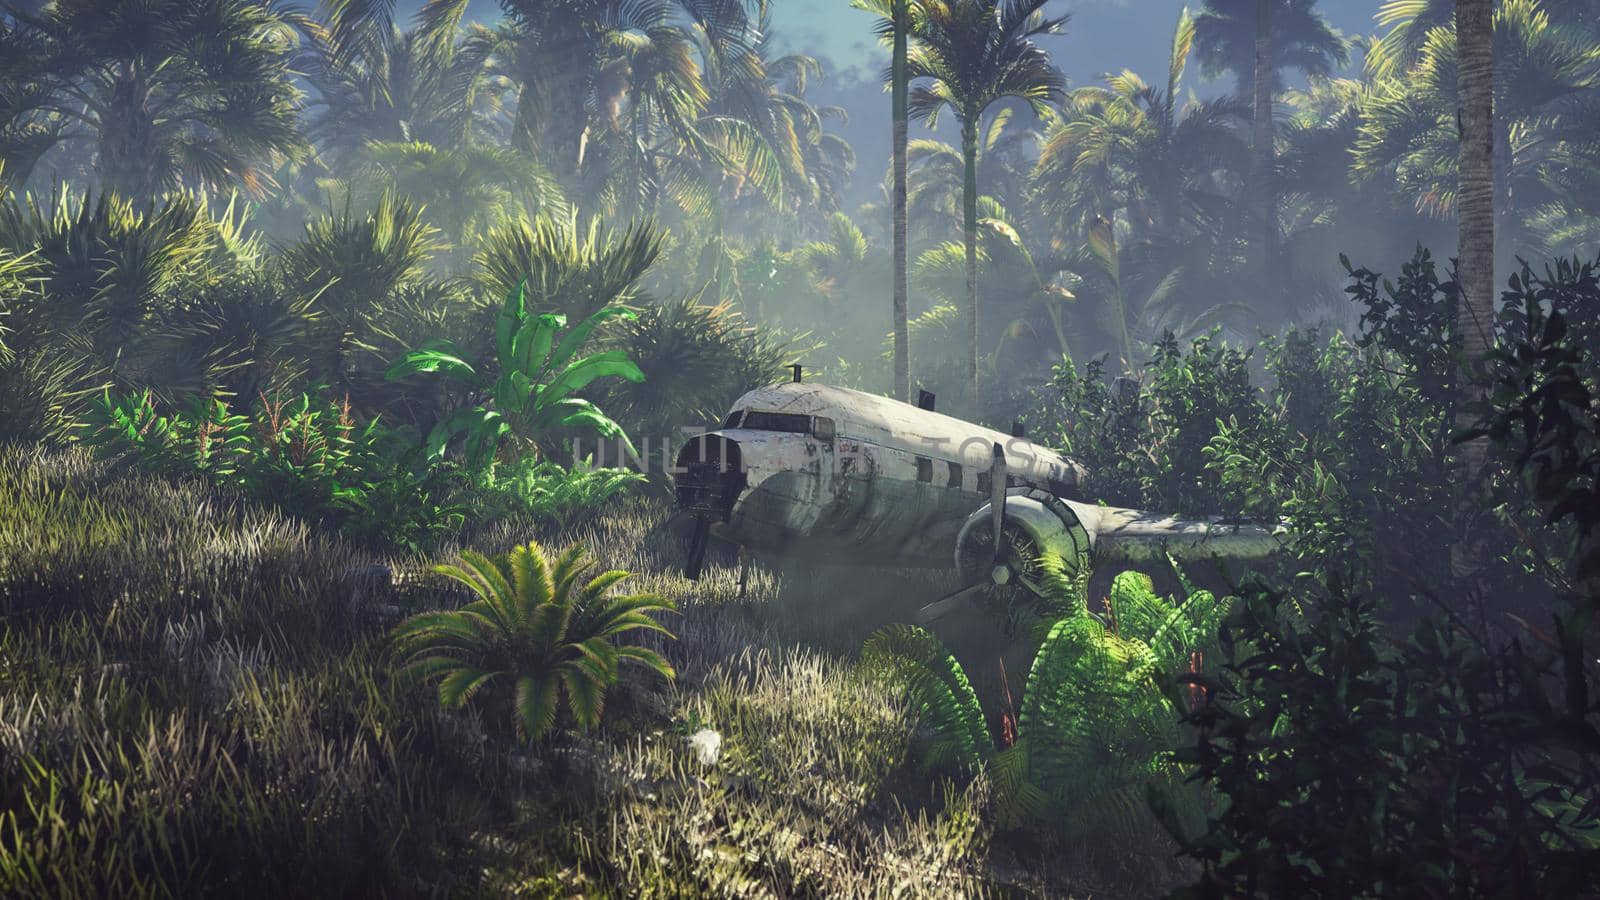 Wrecked plane lies in the jungle in the middle of palm trees and tropical vegetation.